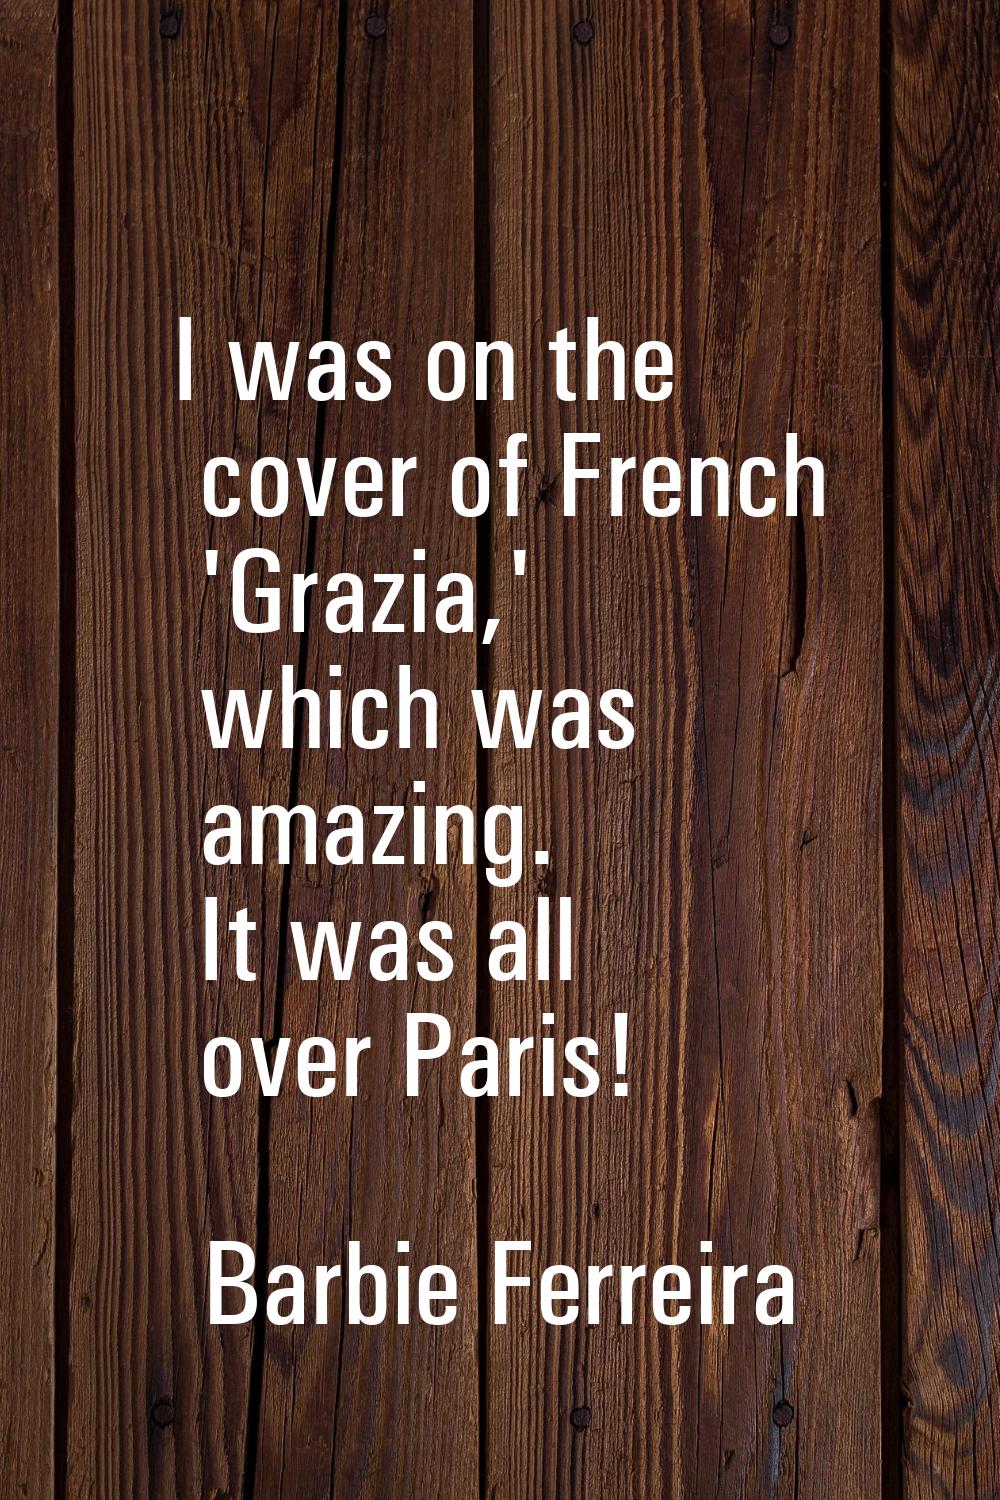 I was on the cover of French 'Grazia,' which was amazing. It was all over Paris!